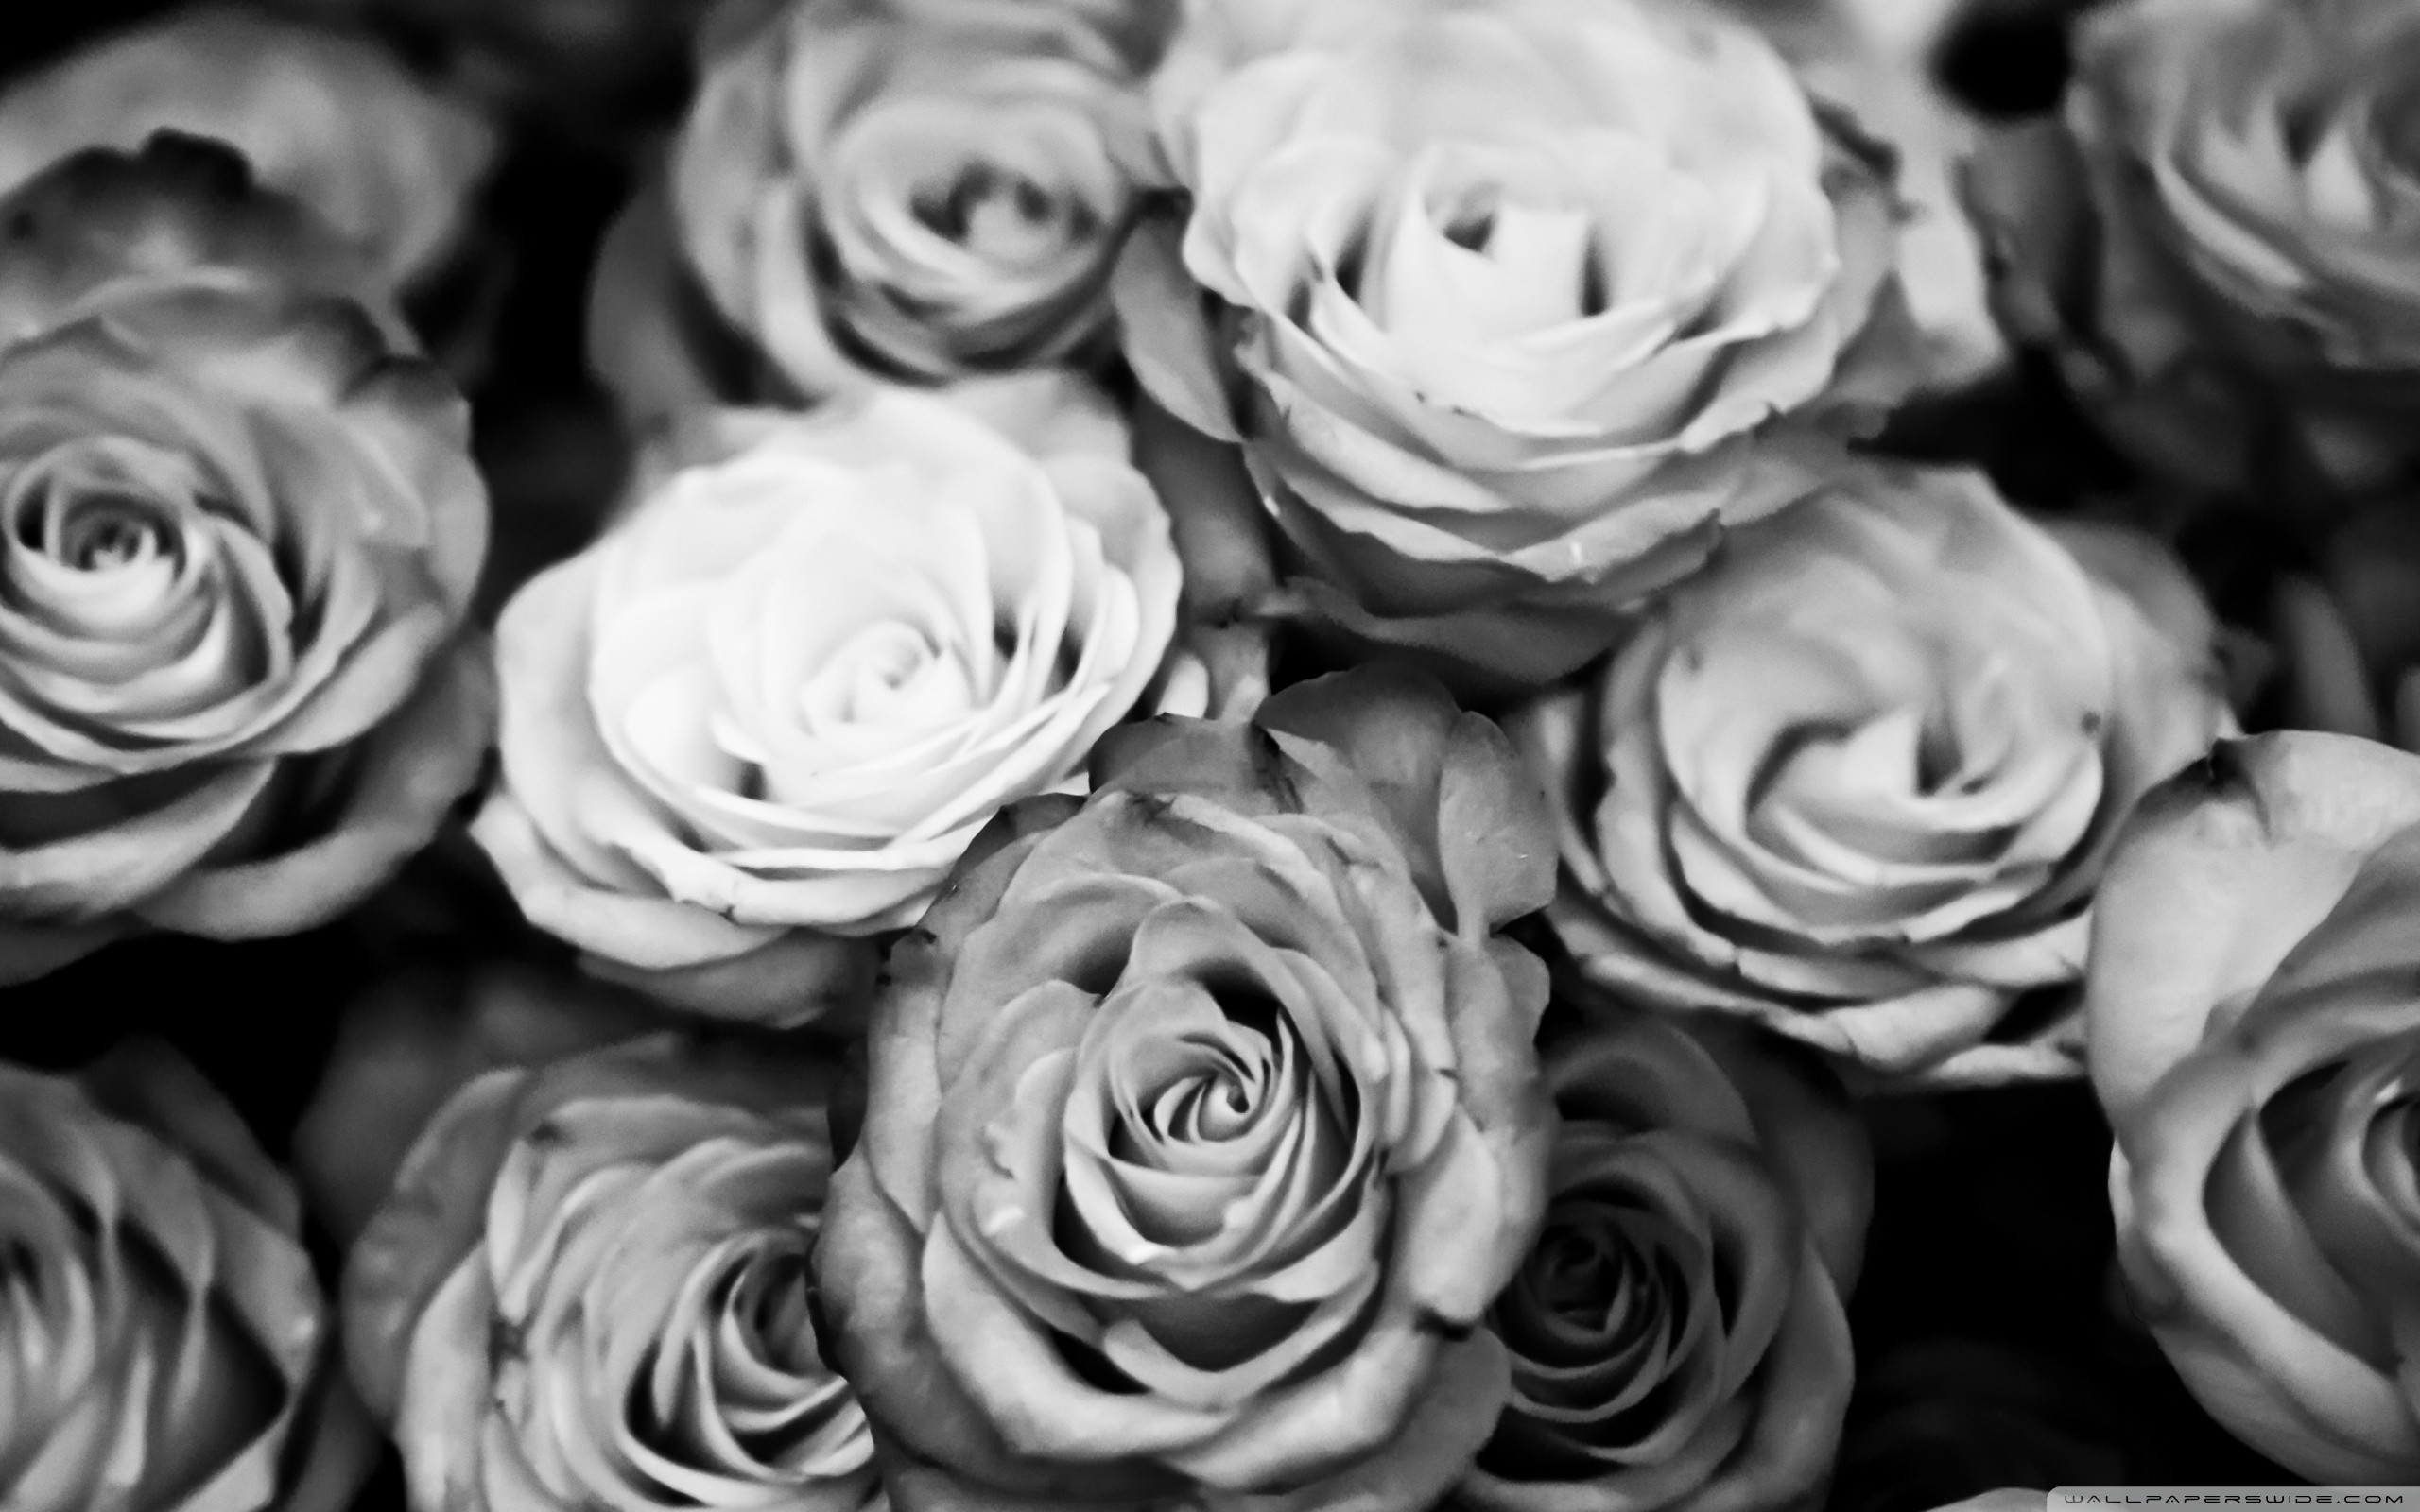 2560x1600 Title : roses black and white â¤ 4k hd desktop wallpaper for 4k ultra hd tv.  Dimension : 2560 x 1600. File Type : JPG/JPEG